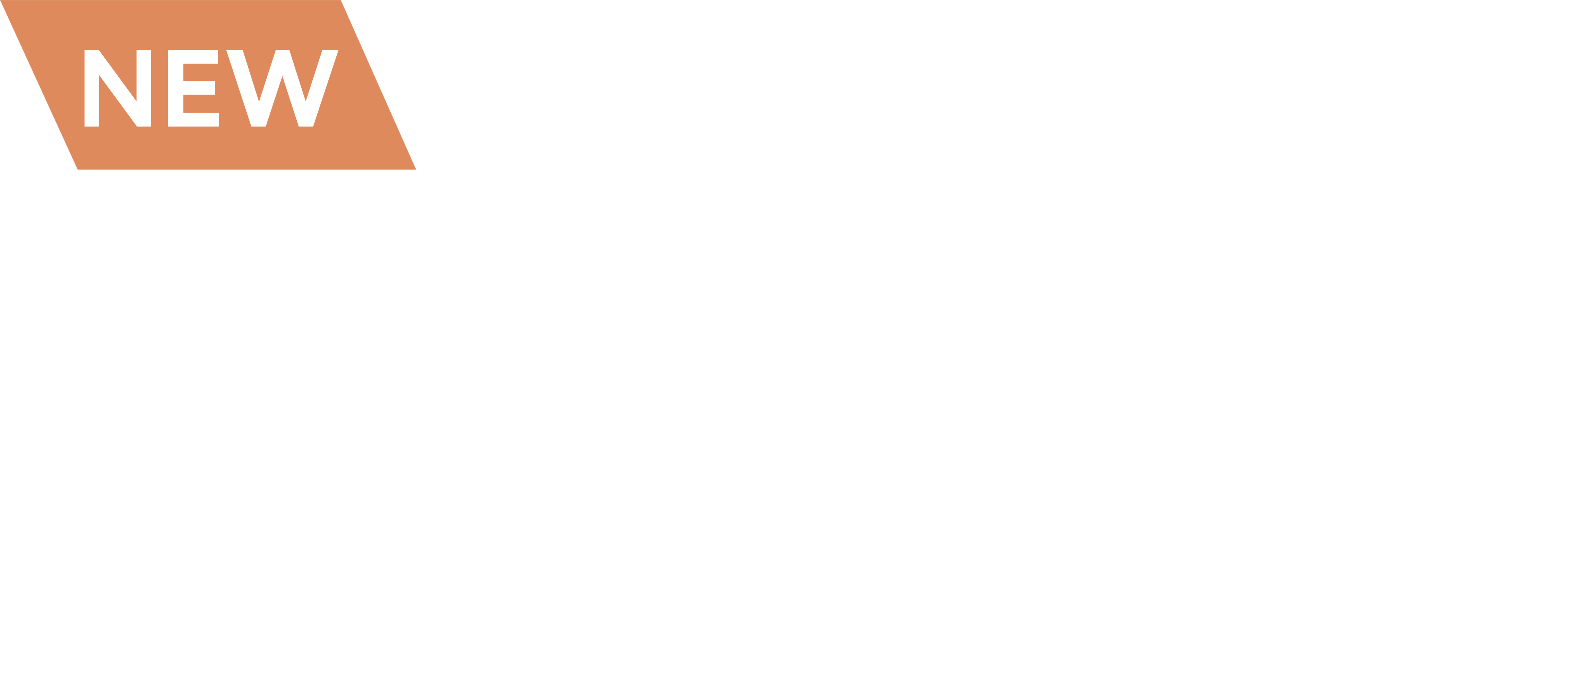 VEEV NOW accent 